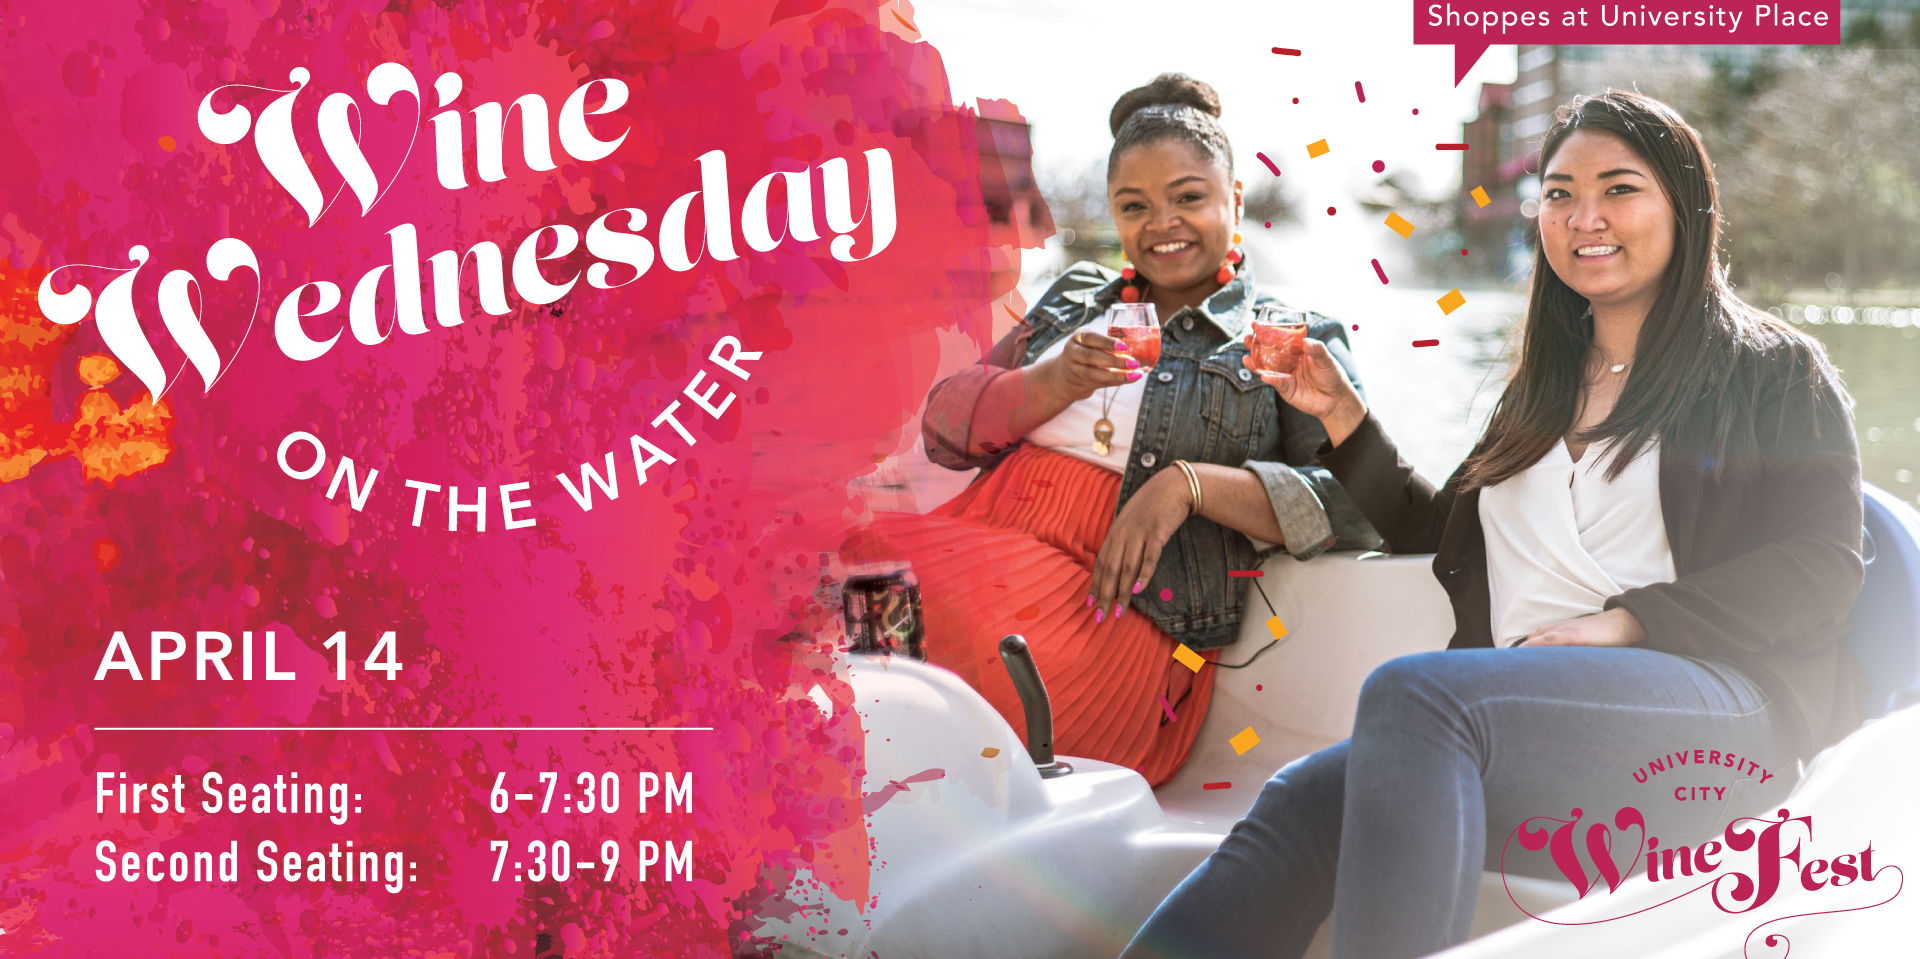 Wine Wednesday on the Water promotional image